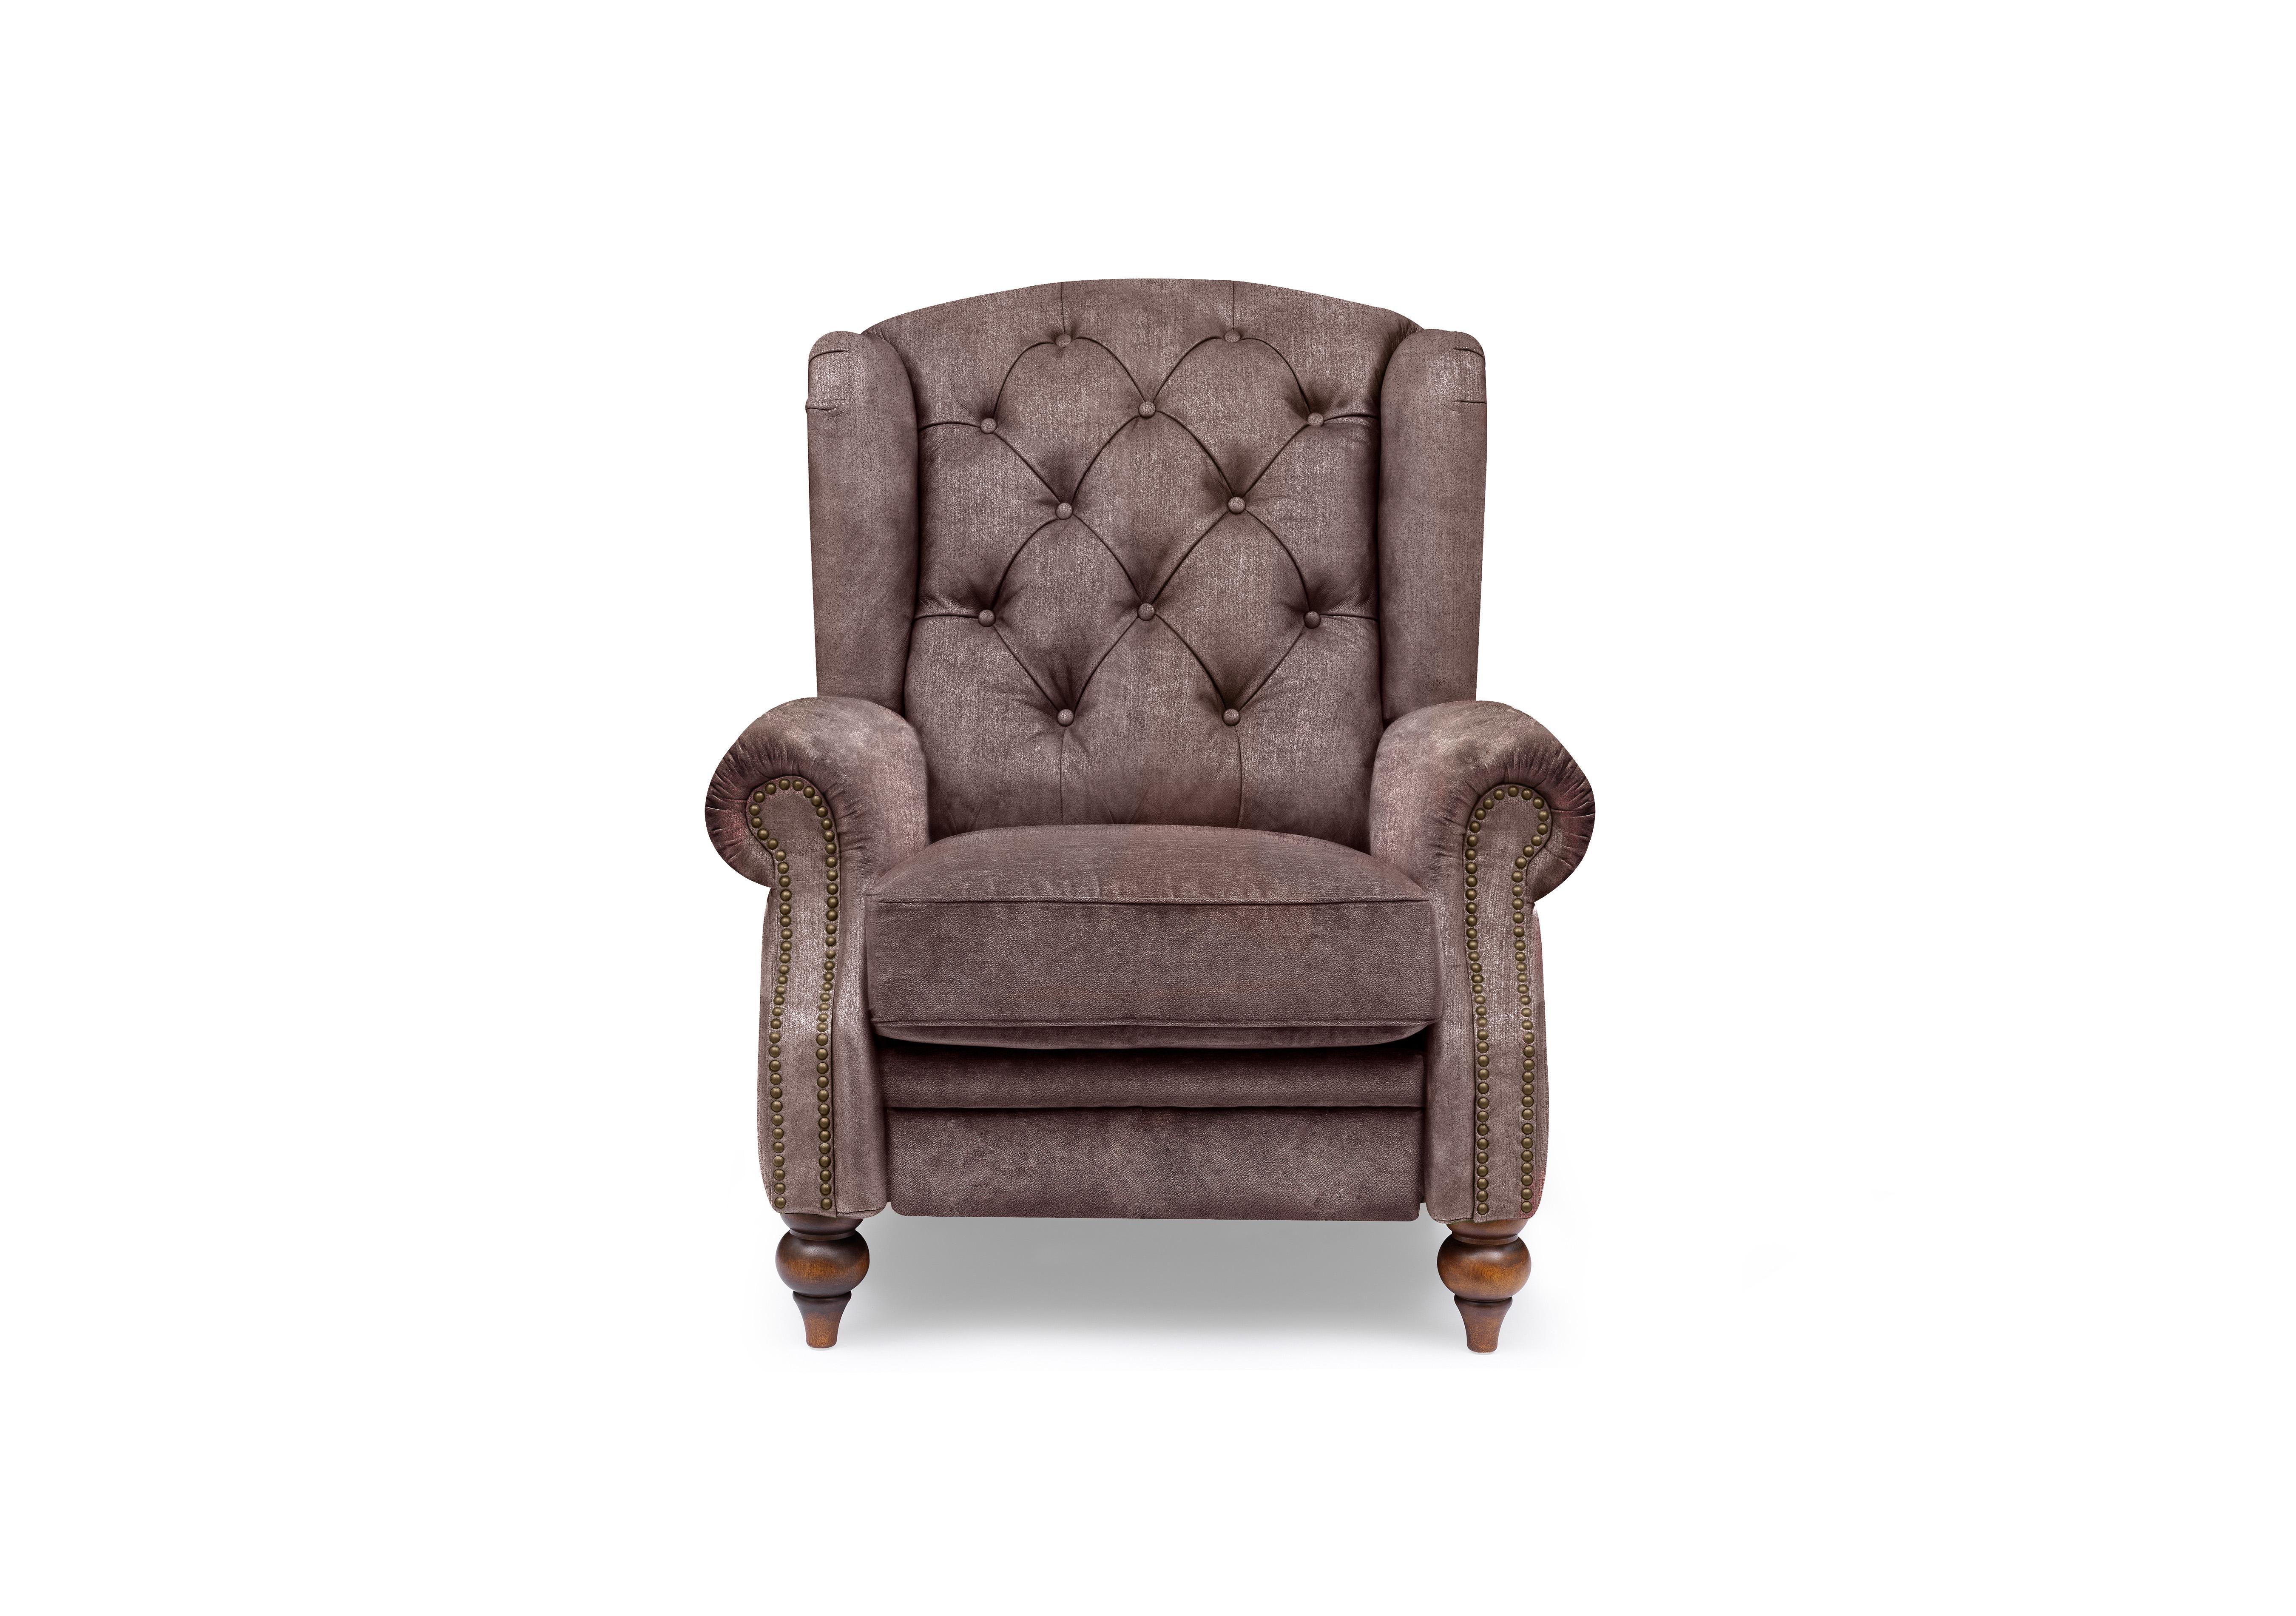 Shackleton Fabric Power Recliner Wing Chair in X3y1-W023 Antler on Furniture Village